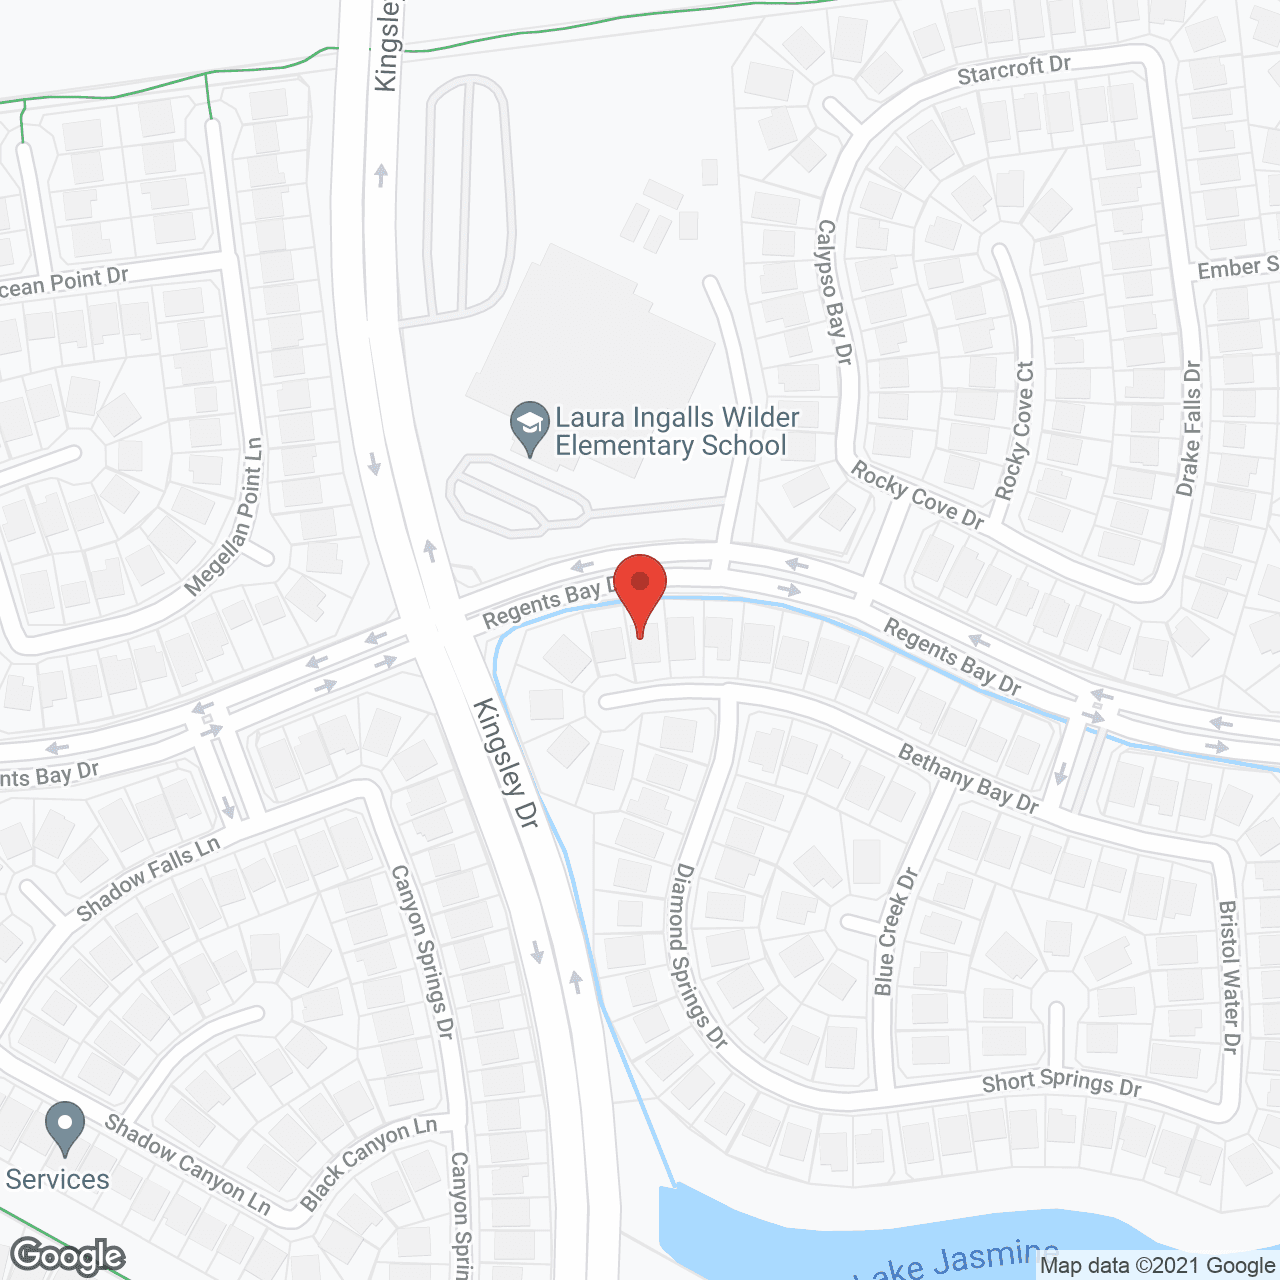 Serenity Care Homes in google map